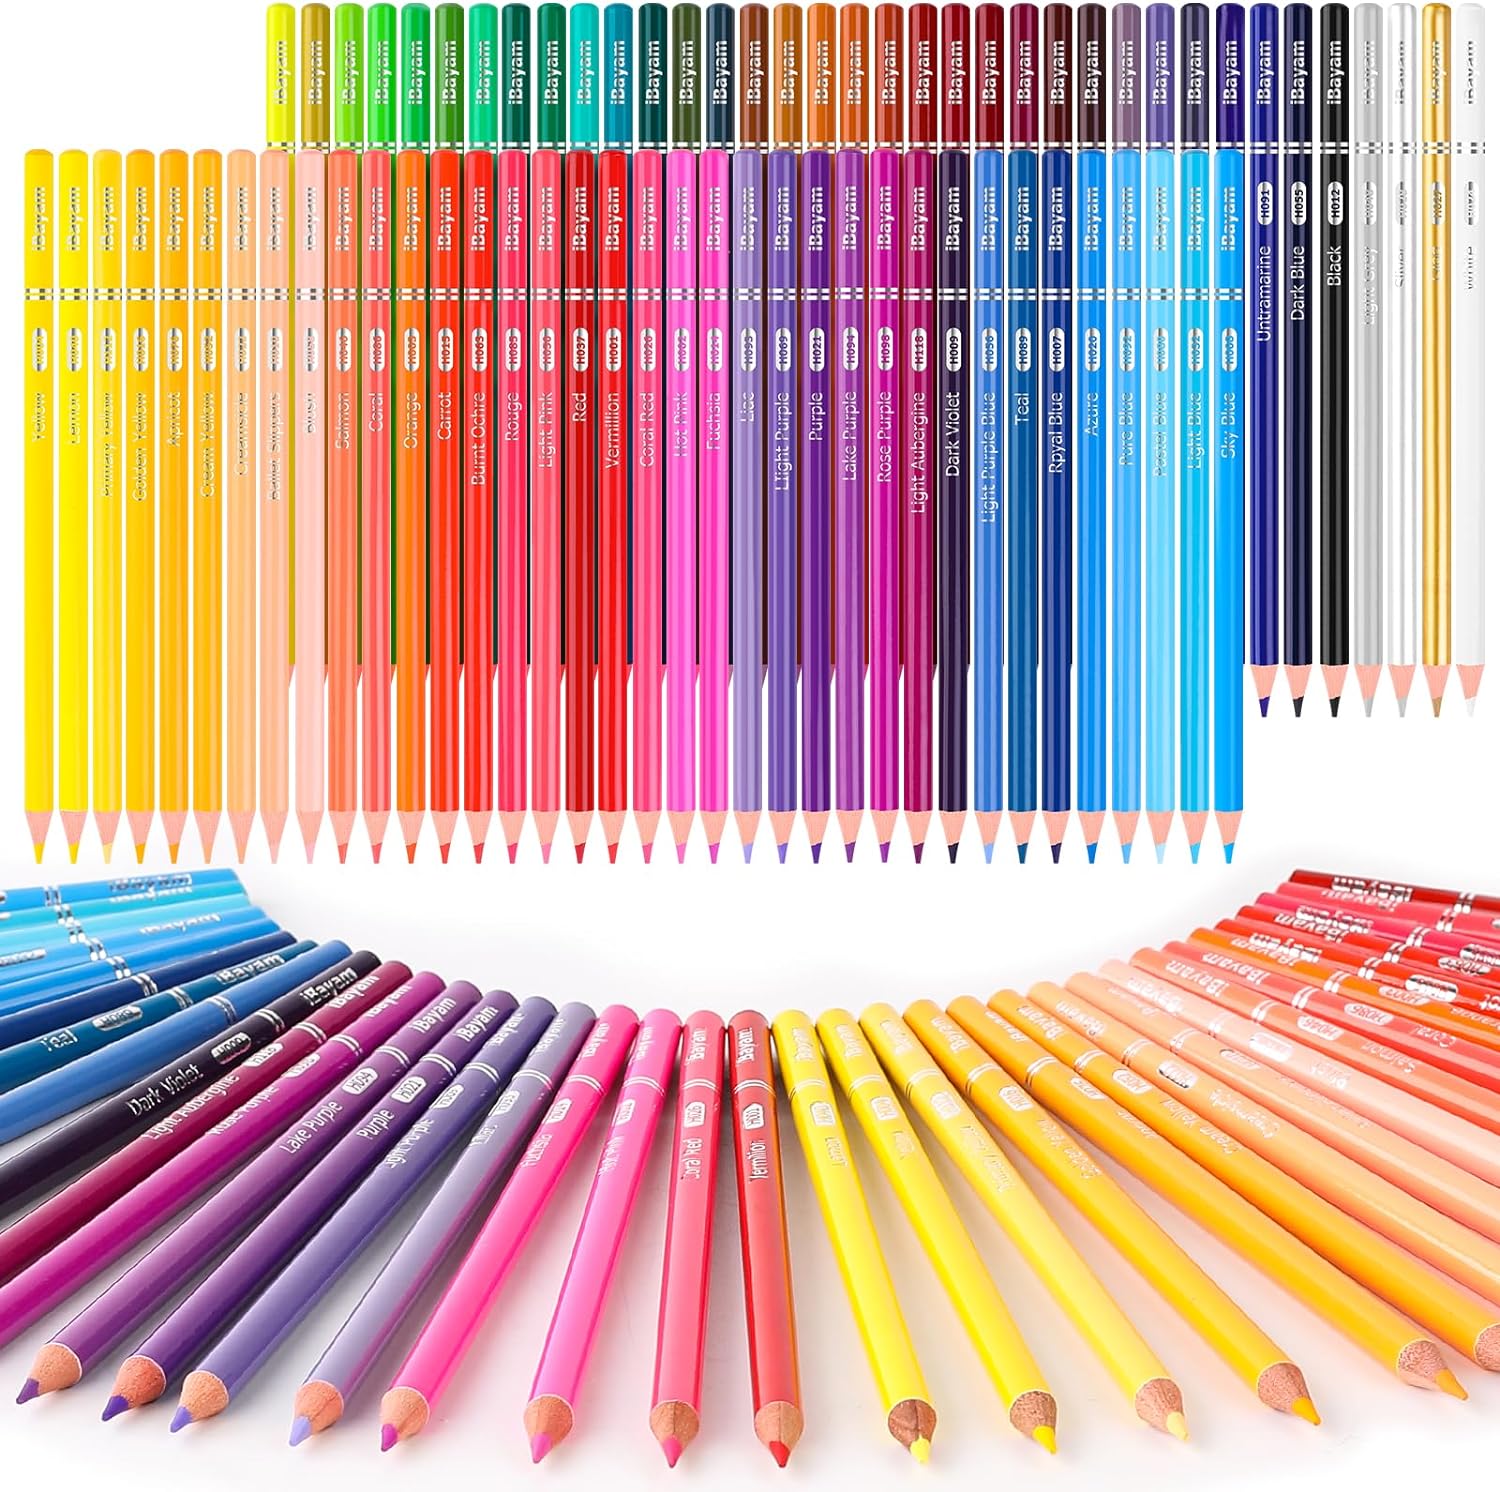 These are really nice pencils. I use them on everything I color. Great on cards or to color in books. nice strong lead and beautiful colors